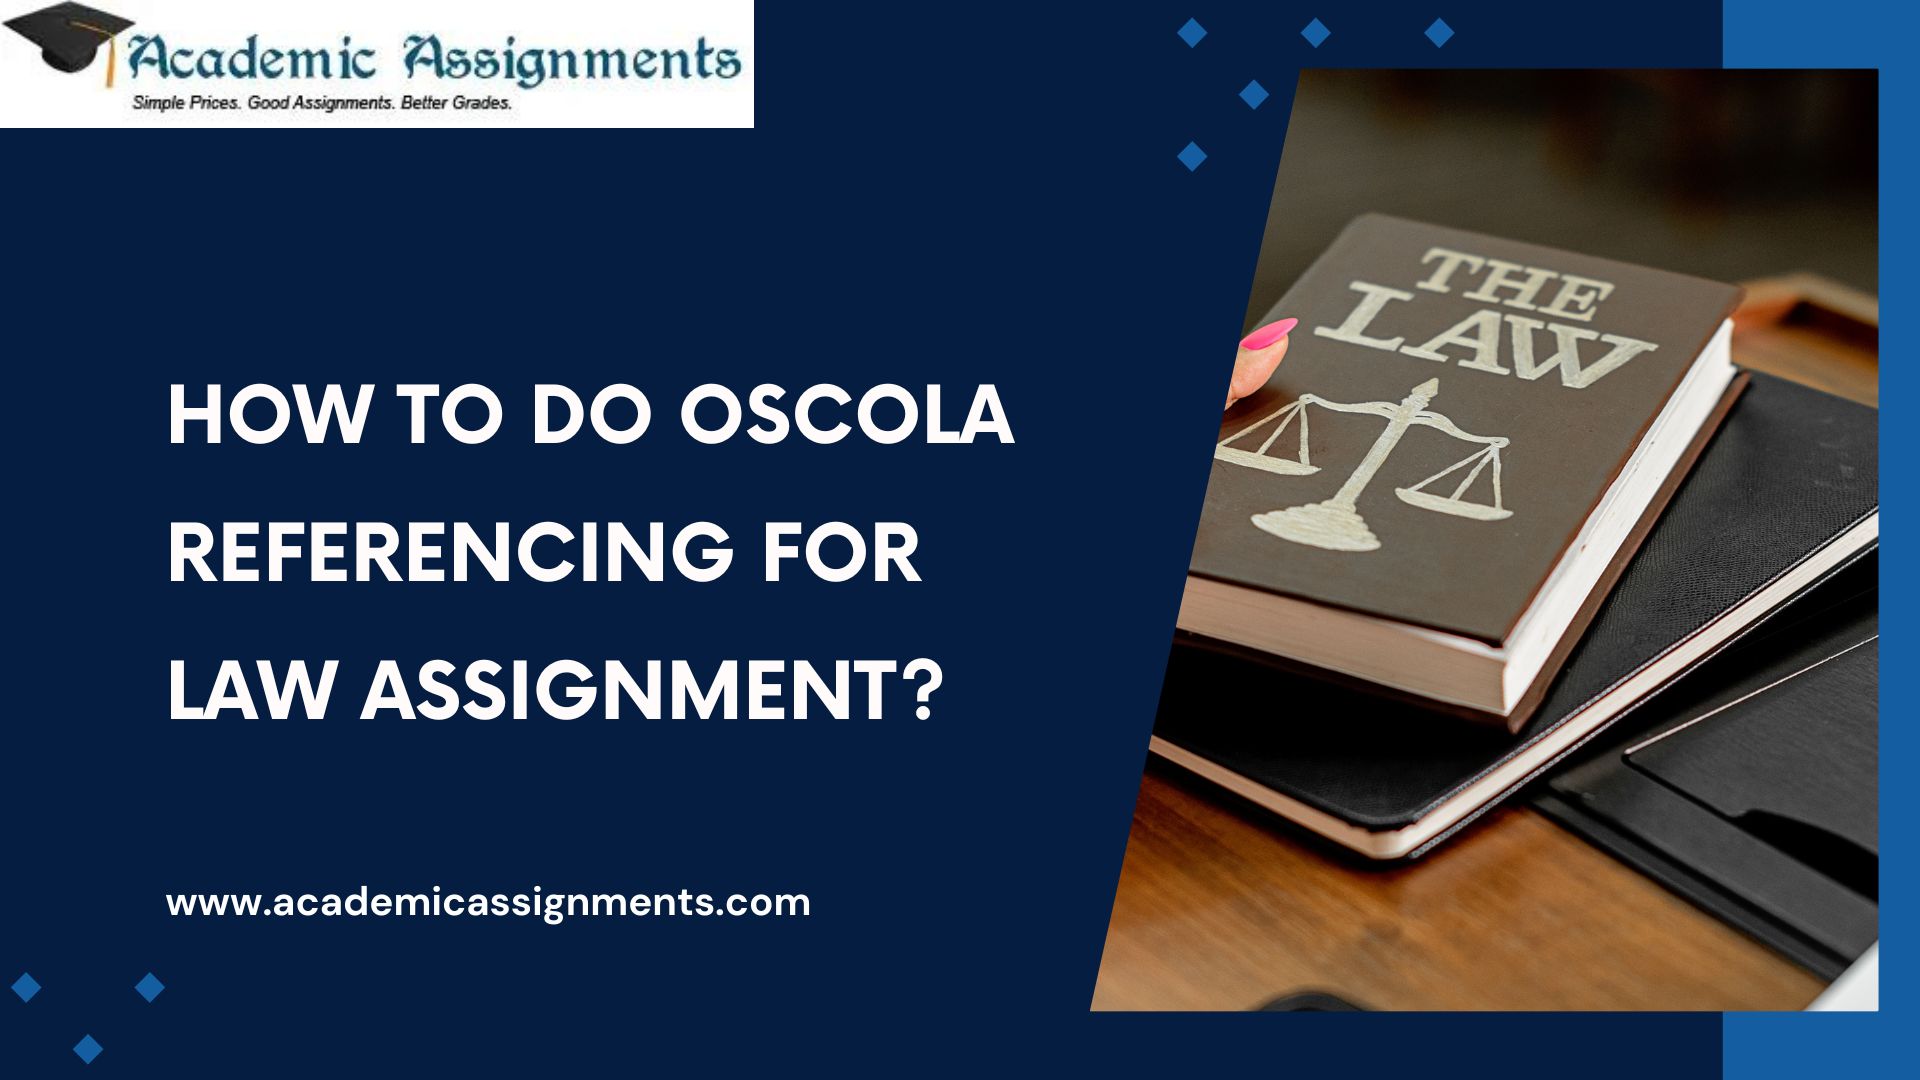 How to Do OSCOLA Referencing for Law Assignment